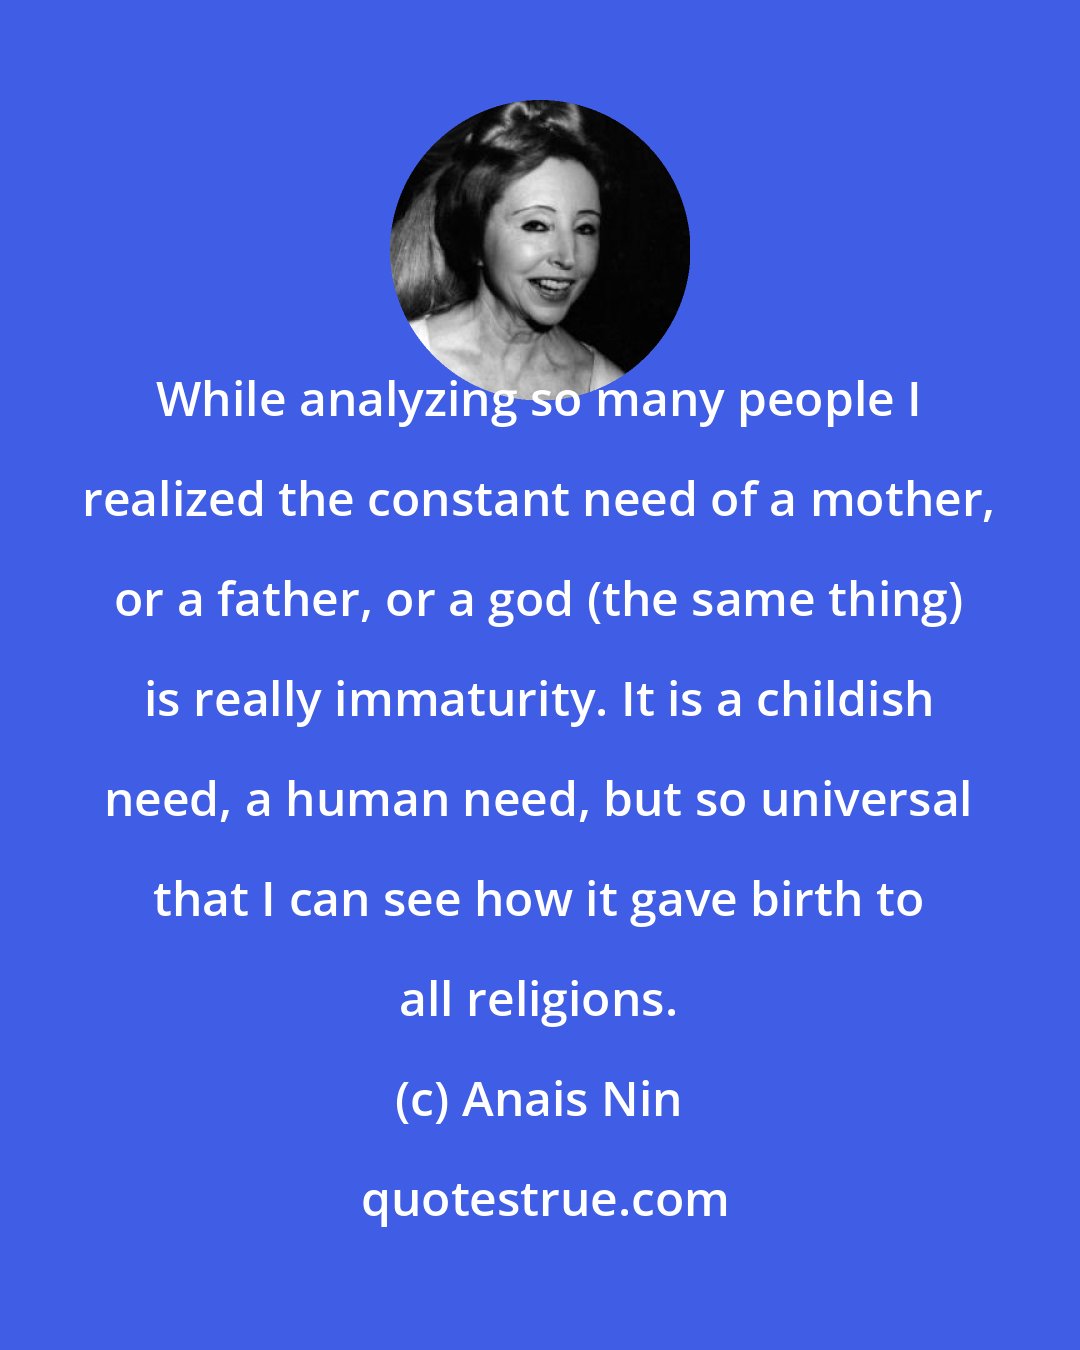 Anais Nin: While analyzing so many people I realized the constant need of a mother, or a father, or a god (the same thing) is really immaturity. It is a childish need, a human need, but so universal that I can see how it gave birth to all religions.